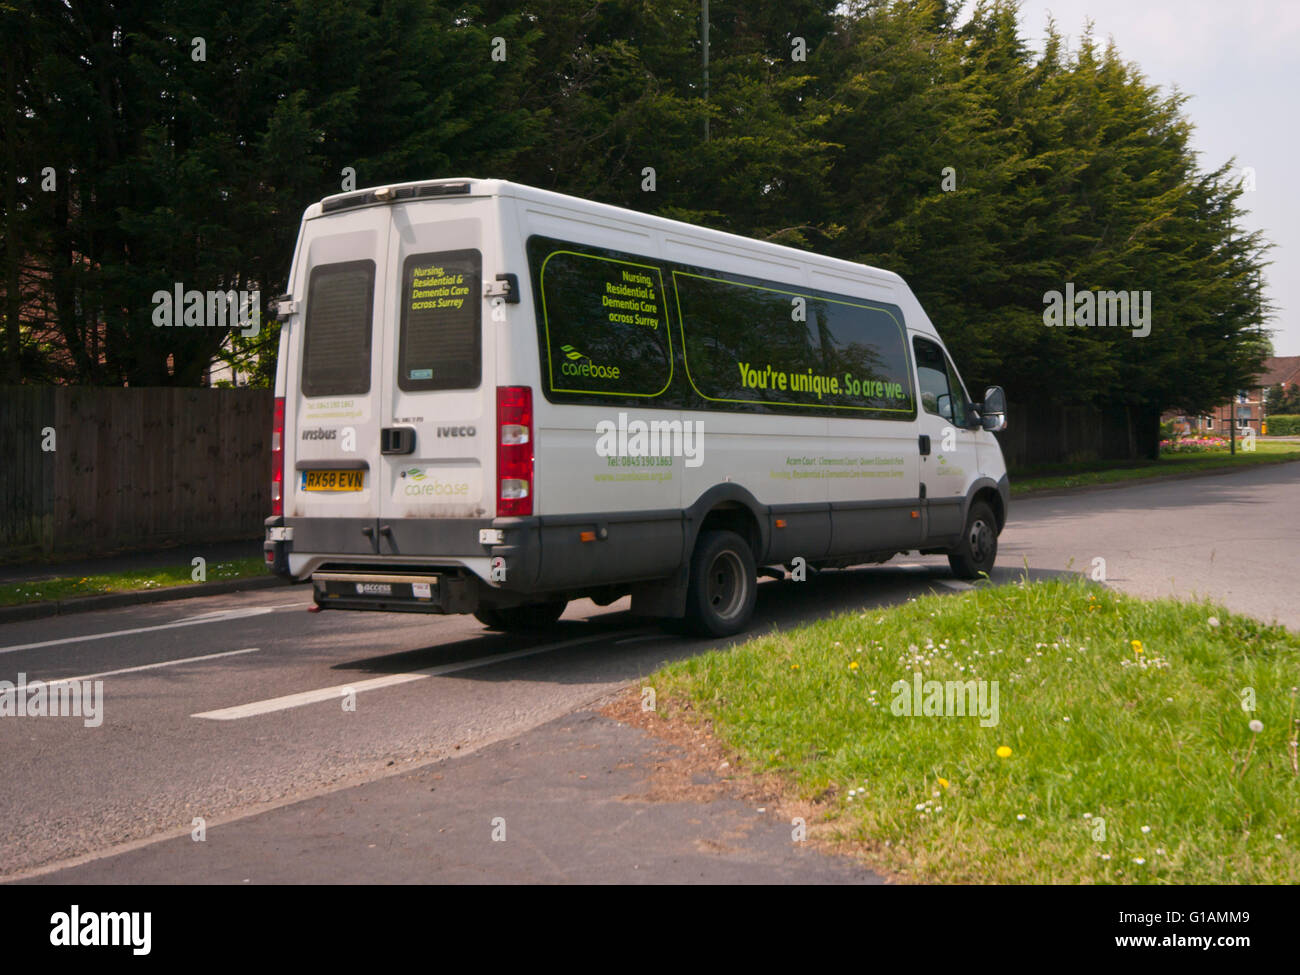 Side View Of A Carebase Vehicle who provide Nursing Residential and Dementia Care Across Surrey England Stock Photo